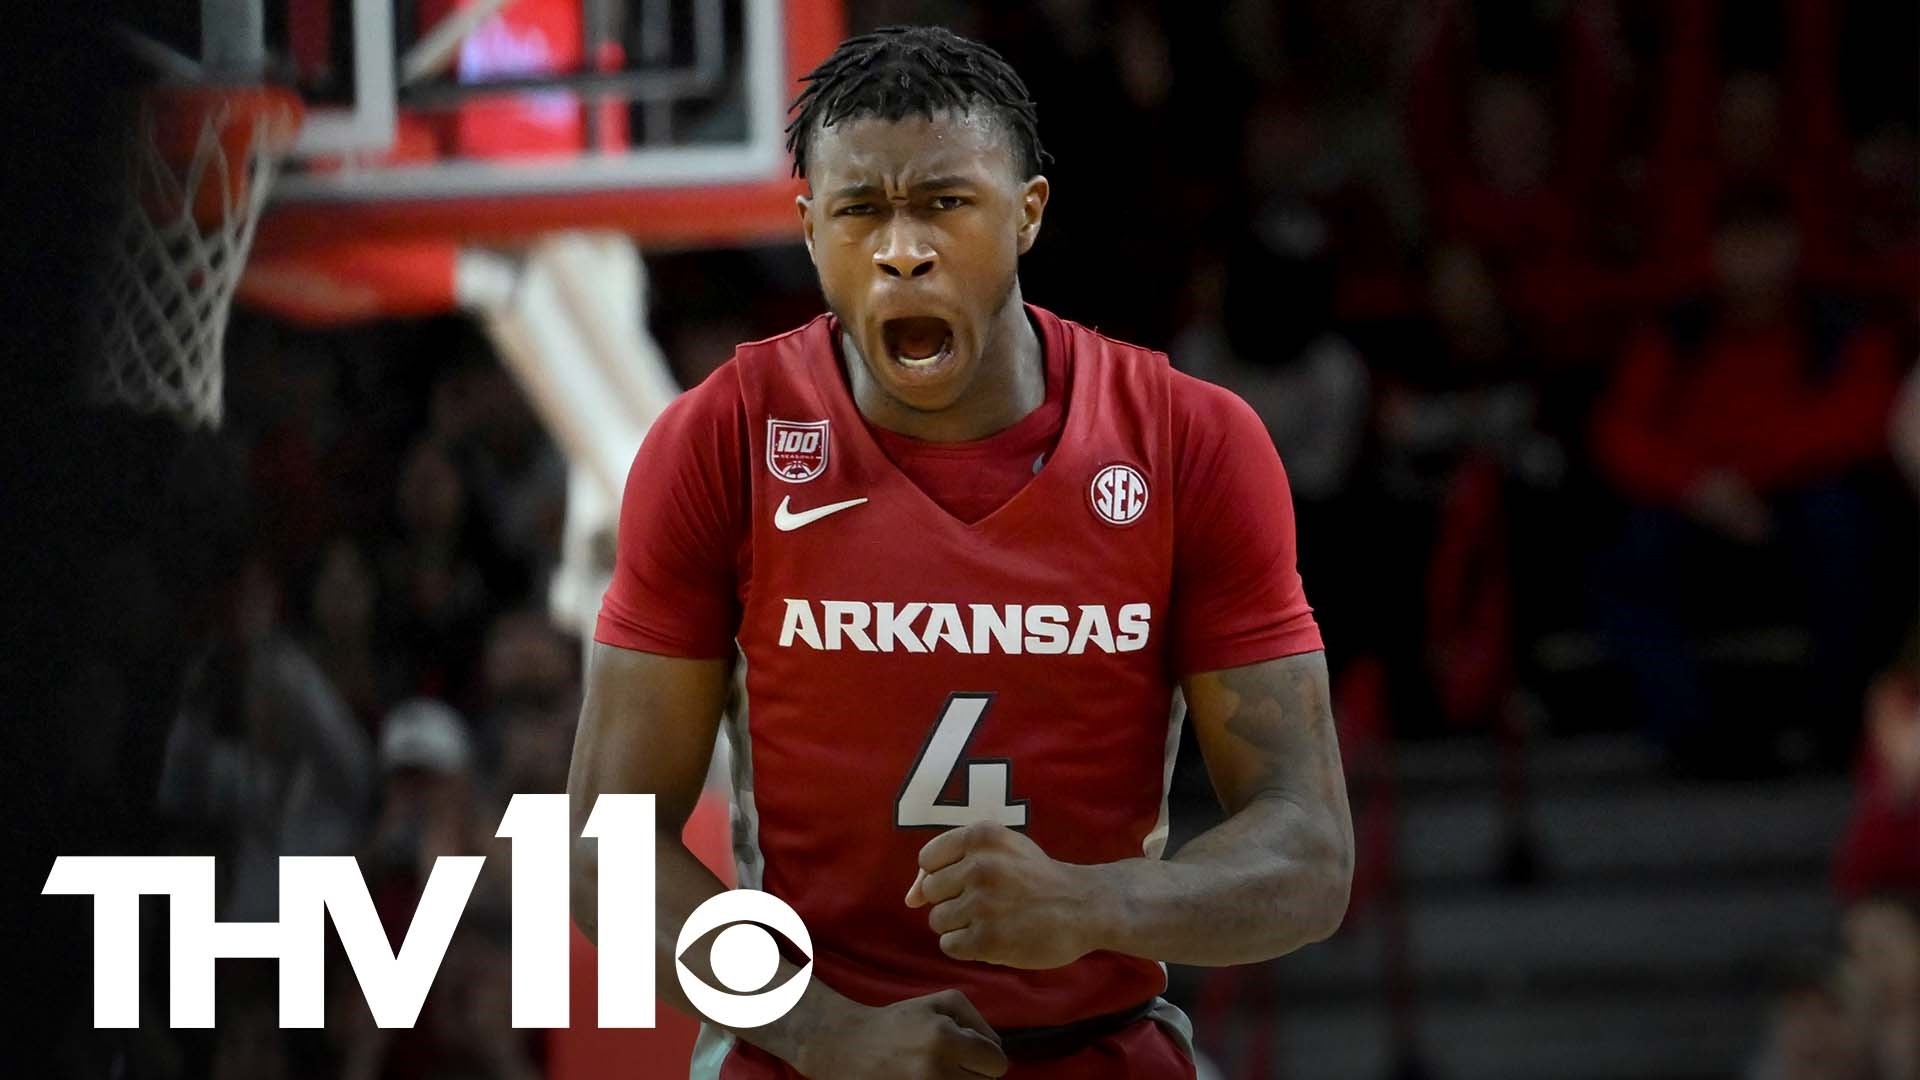 Devo Davis has become the heart & soul of the Razorback basketball team. After his huge game against #1 Kansas, both his teammates and his hometown are celebrating.